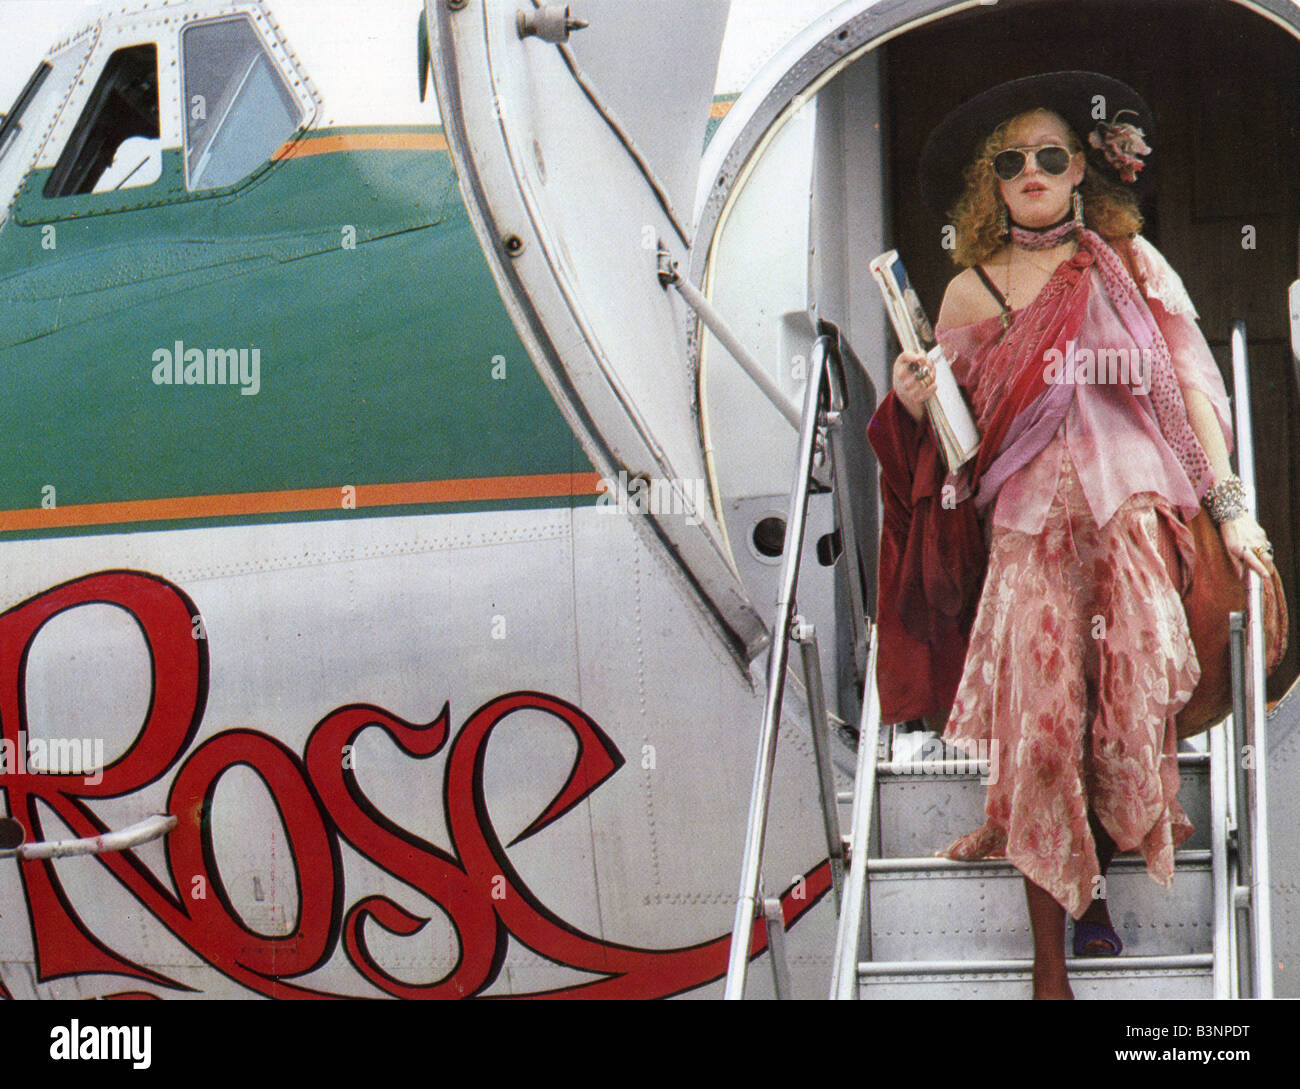 THE ROSE 1979 TCF film with Bette Midler Stock Photo - Alamy